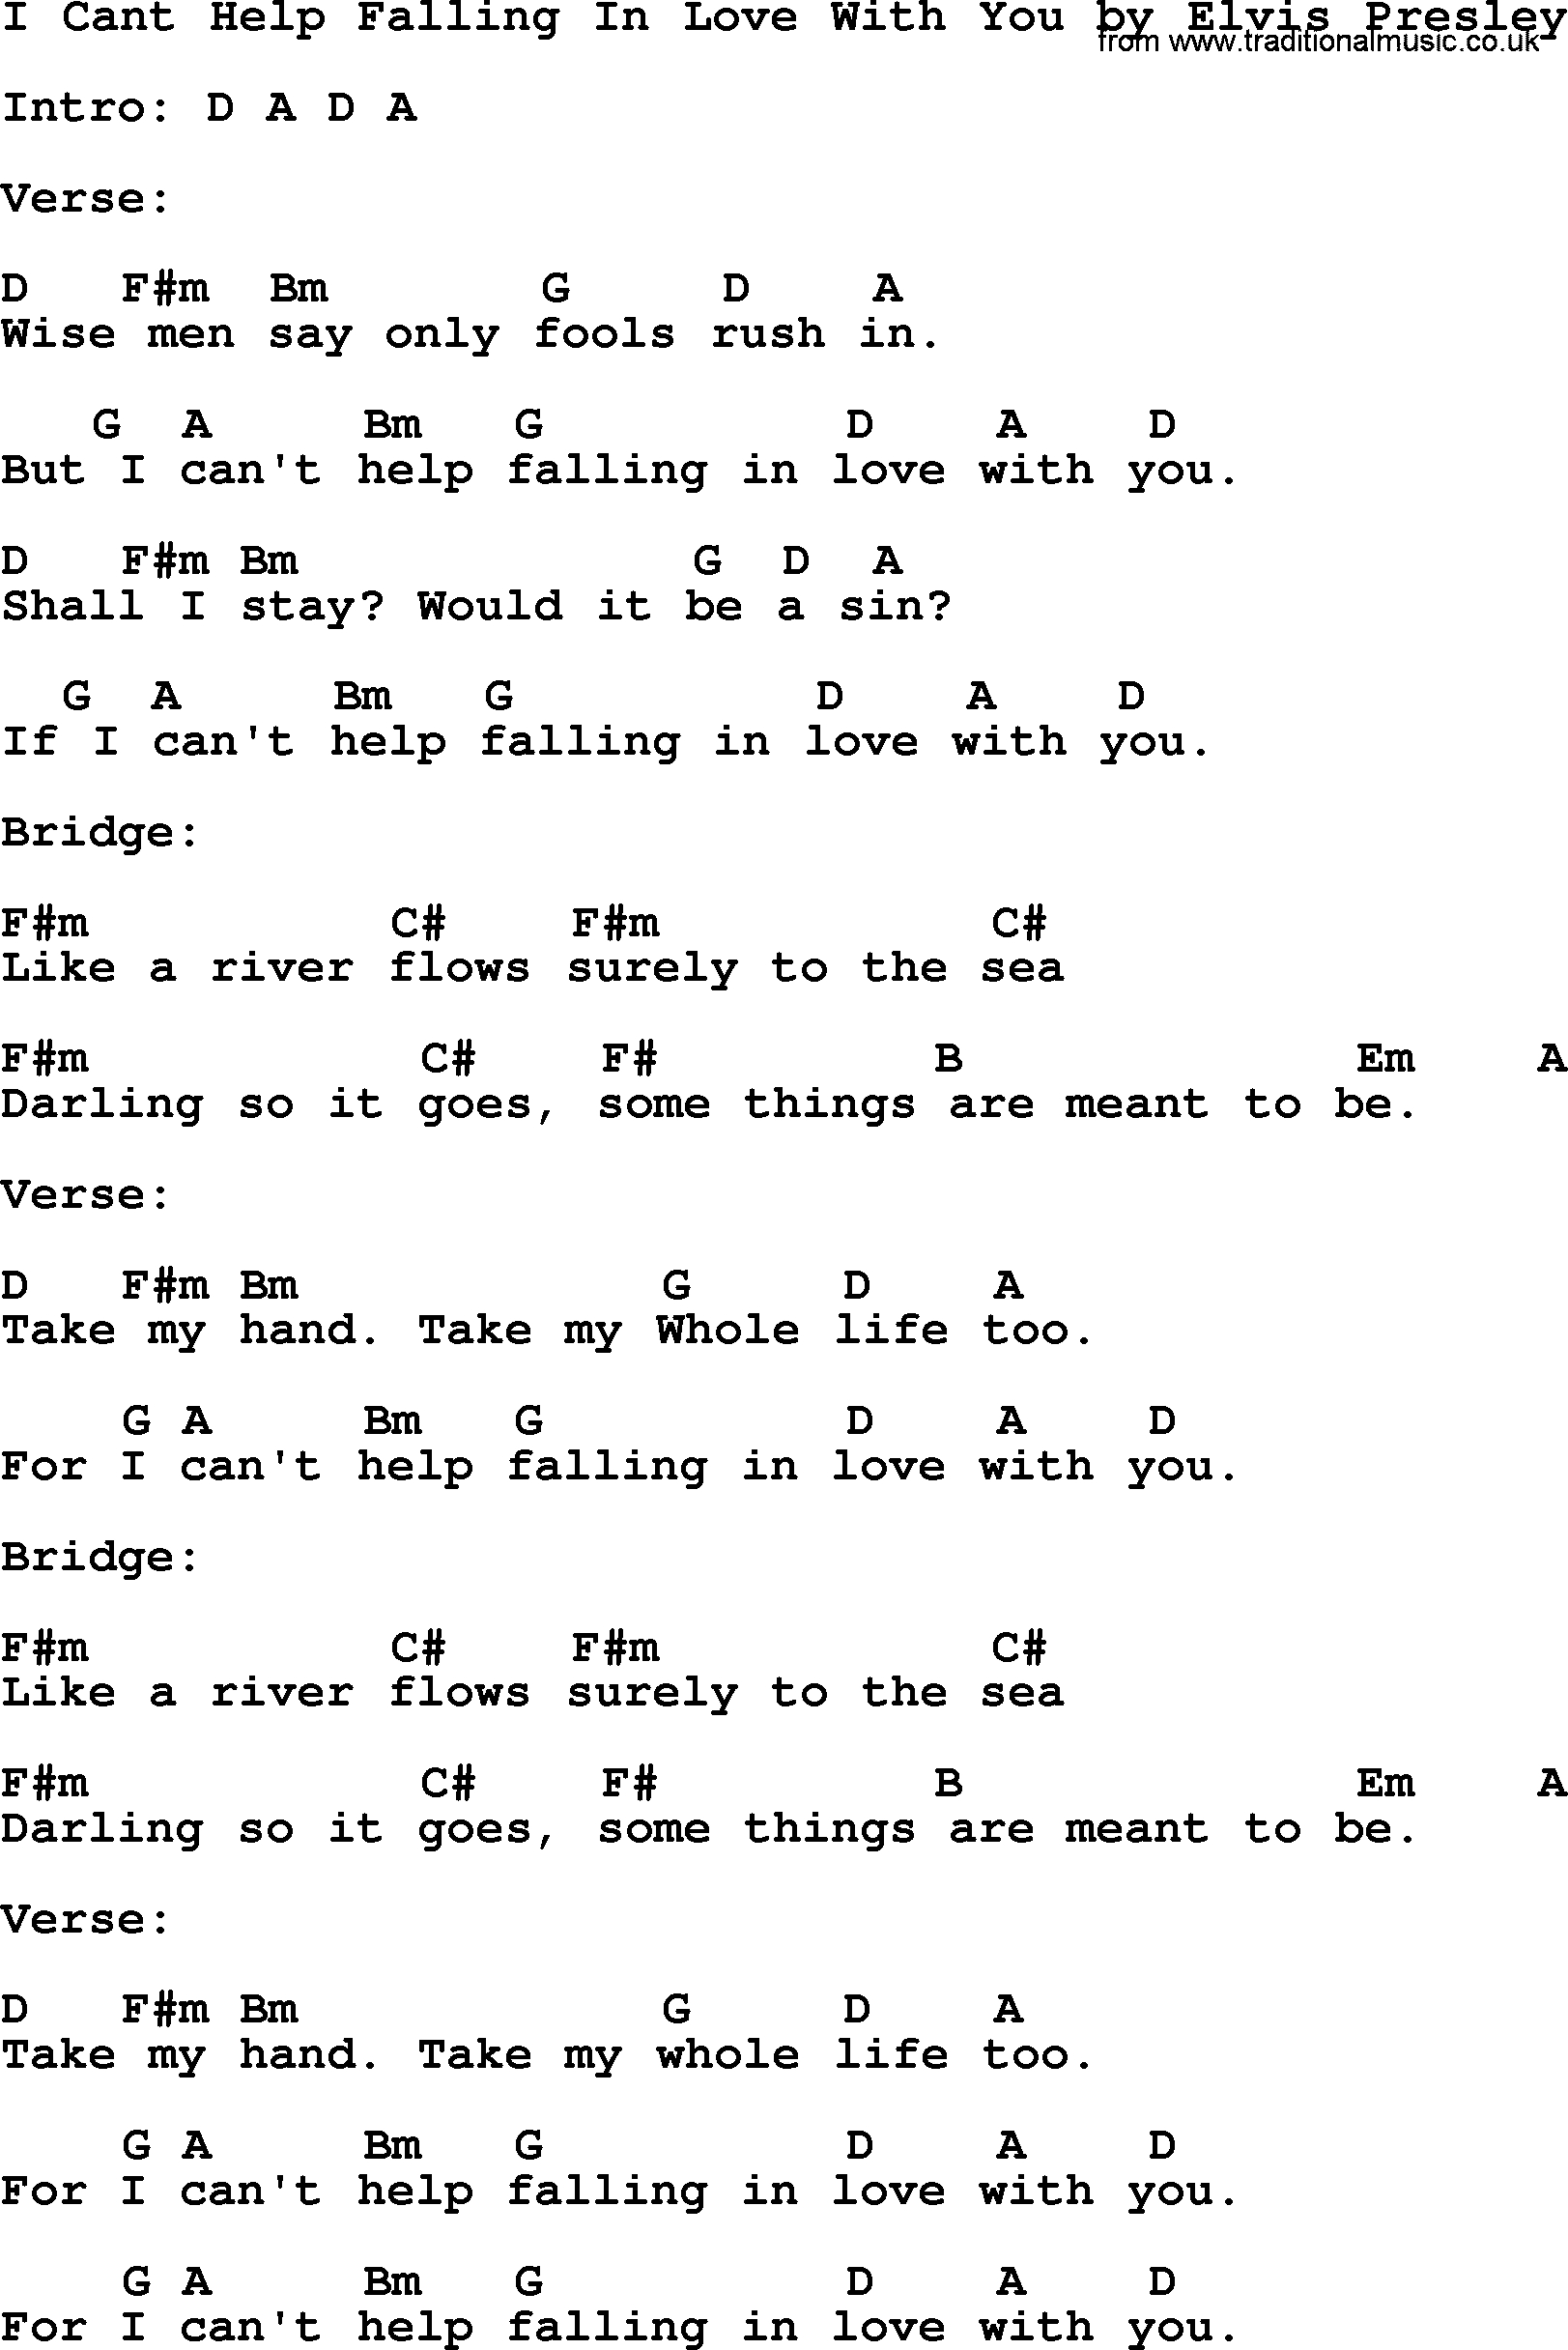 Can T Help Falling In Love Chords I Cant Help Falling In Love With You Elvis Presley Lyrics And